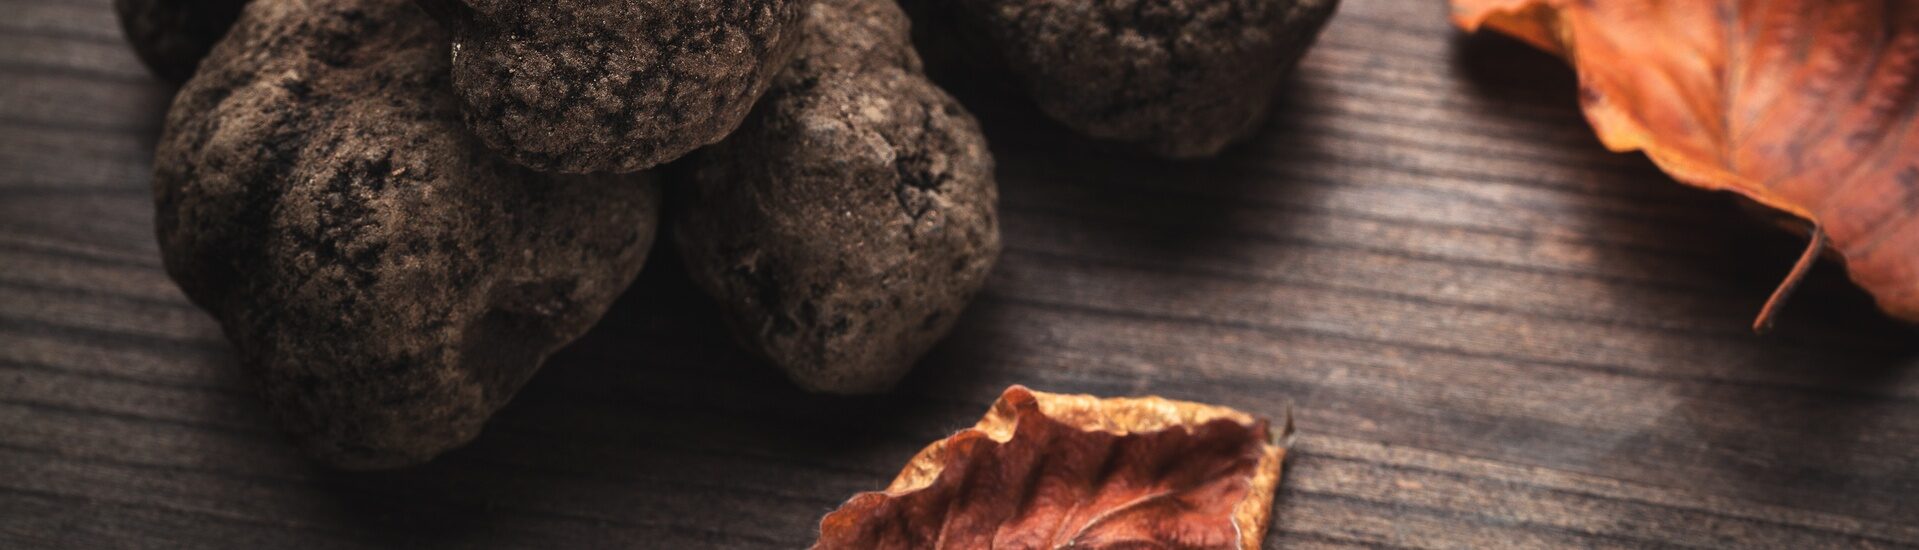 Truffle Cultivation: History, Technology, Challenges by Peter Sourzat